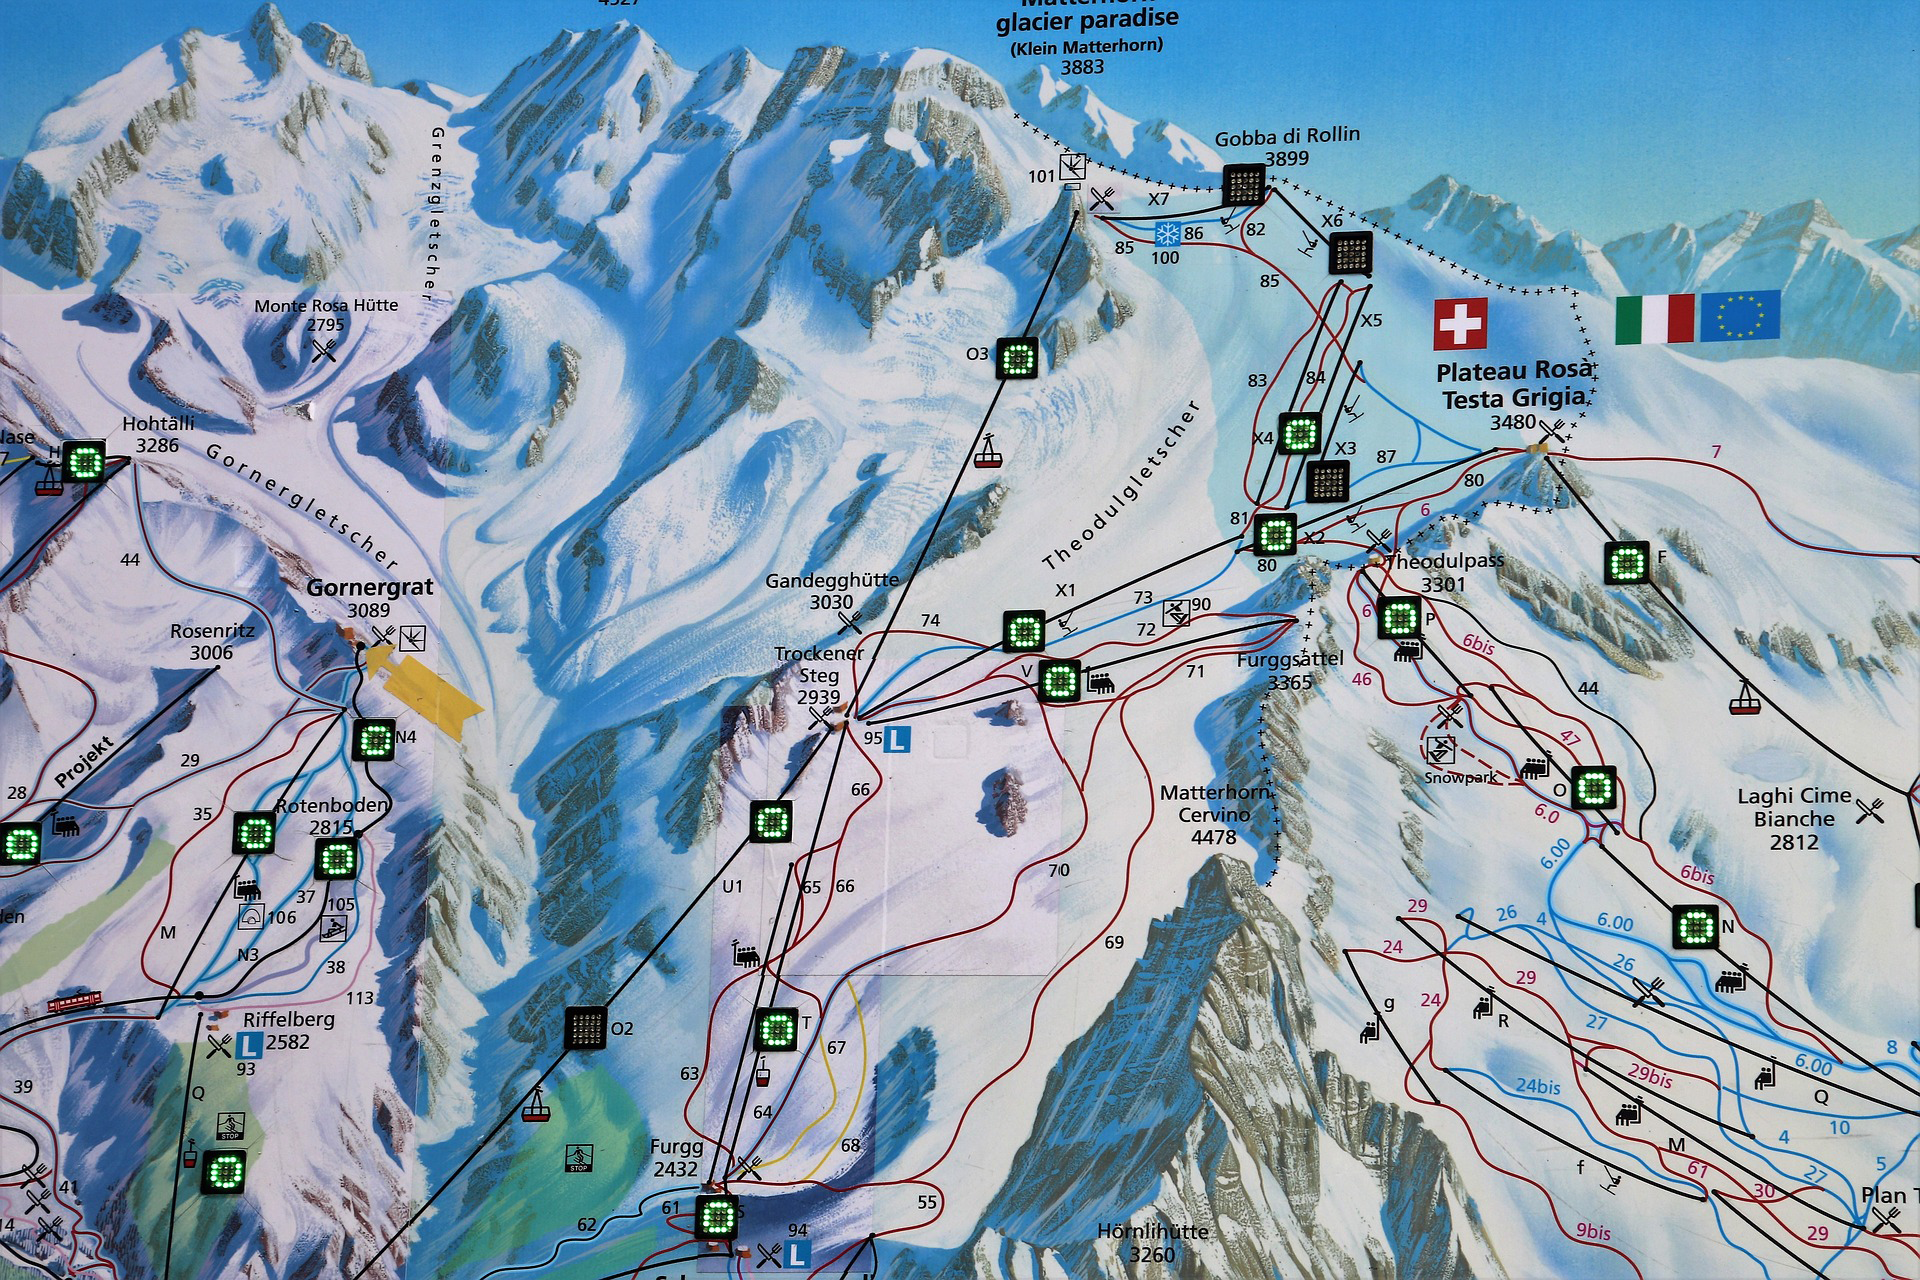 Trail Map for Skiers and Snowboarders Showing Mountains and Paths